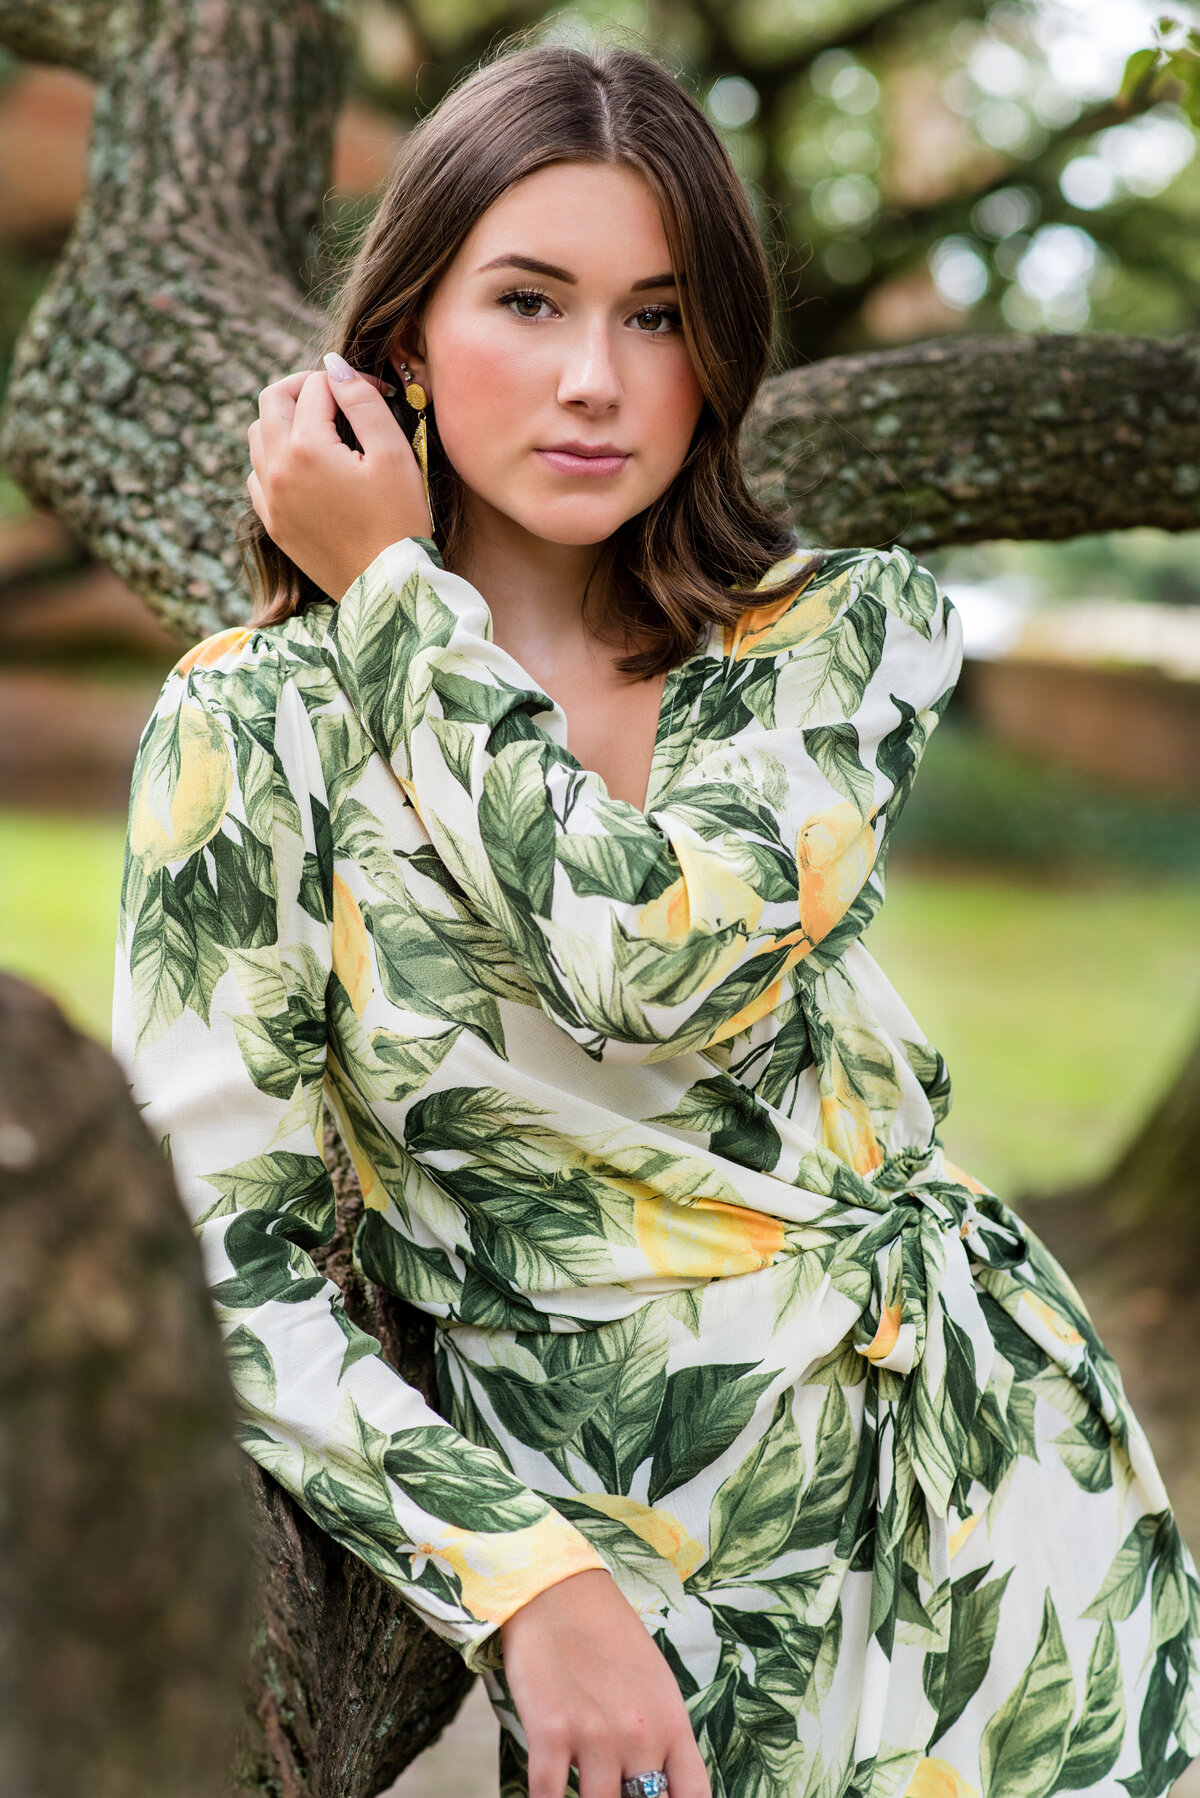 Cosby high school girl poses in tree wearing a tropical print jumsuit during her senior portrait session in Williamsburg, VA.